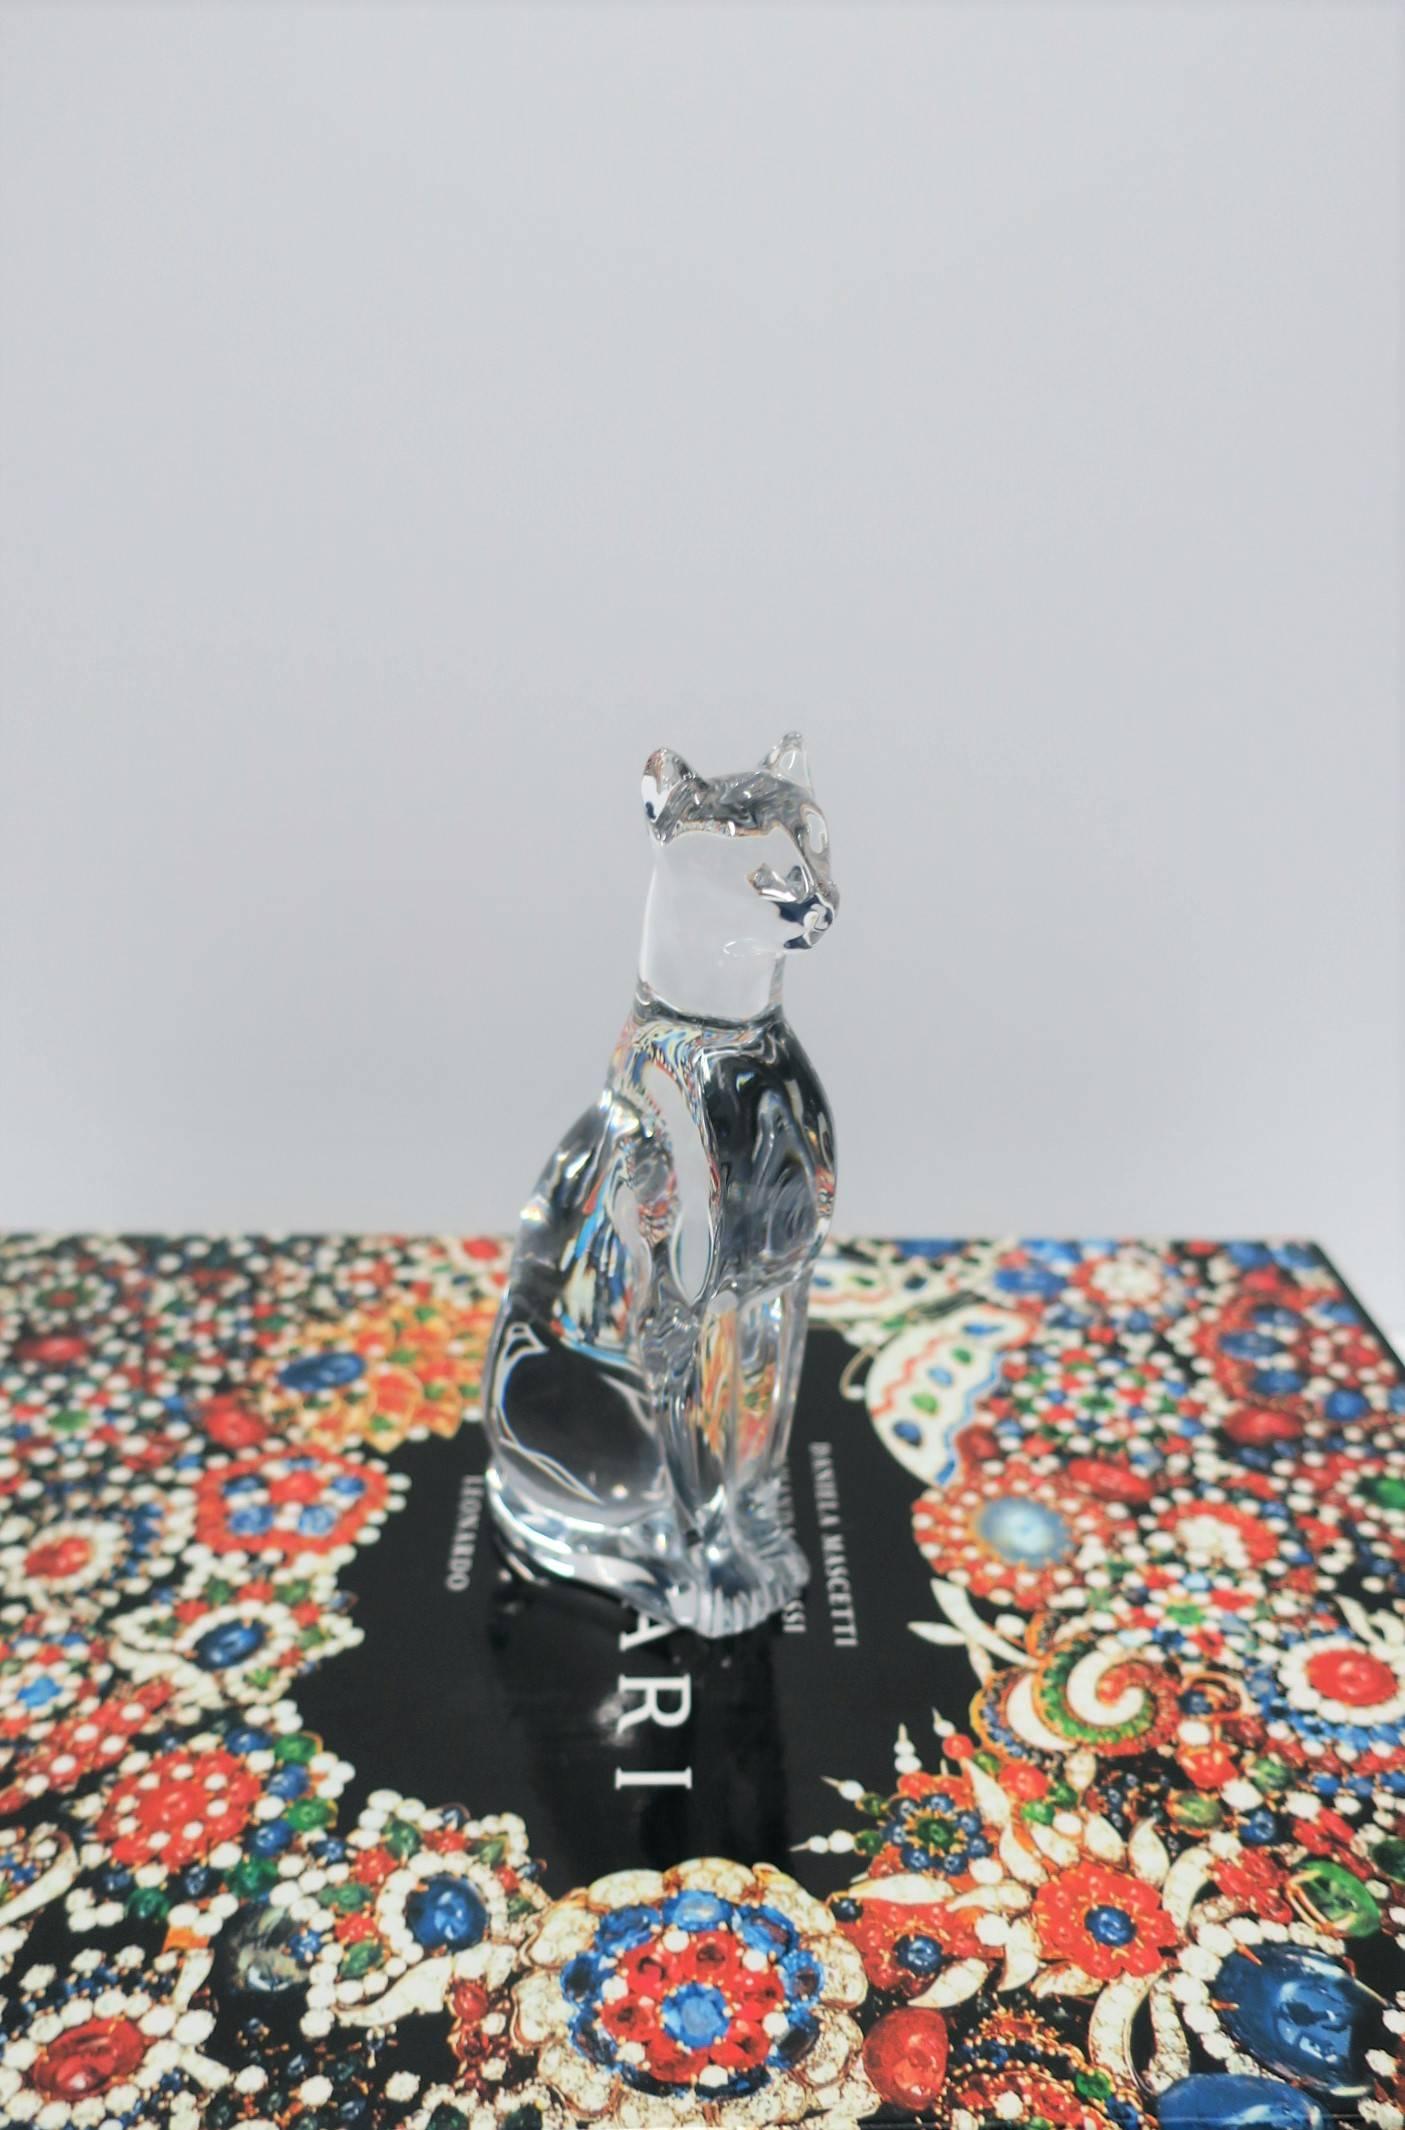 20th Century Art Deco French Baccarat Crystal Cheetah or Panther Cat Sculpture